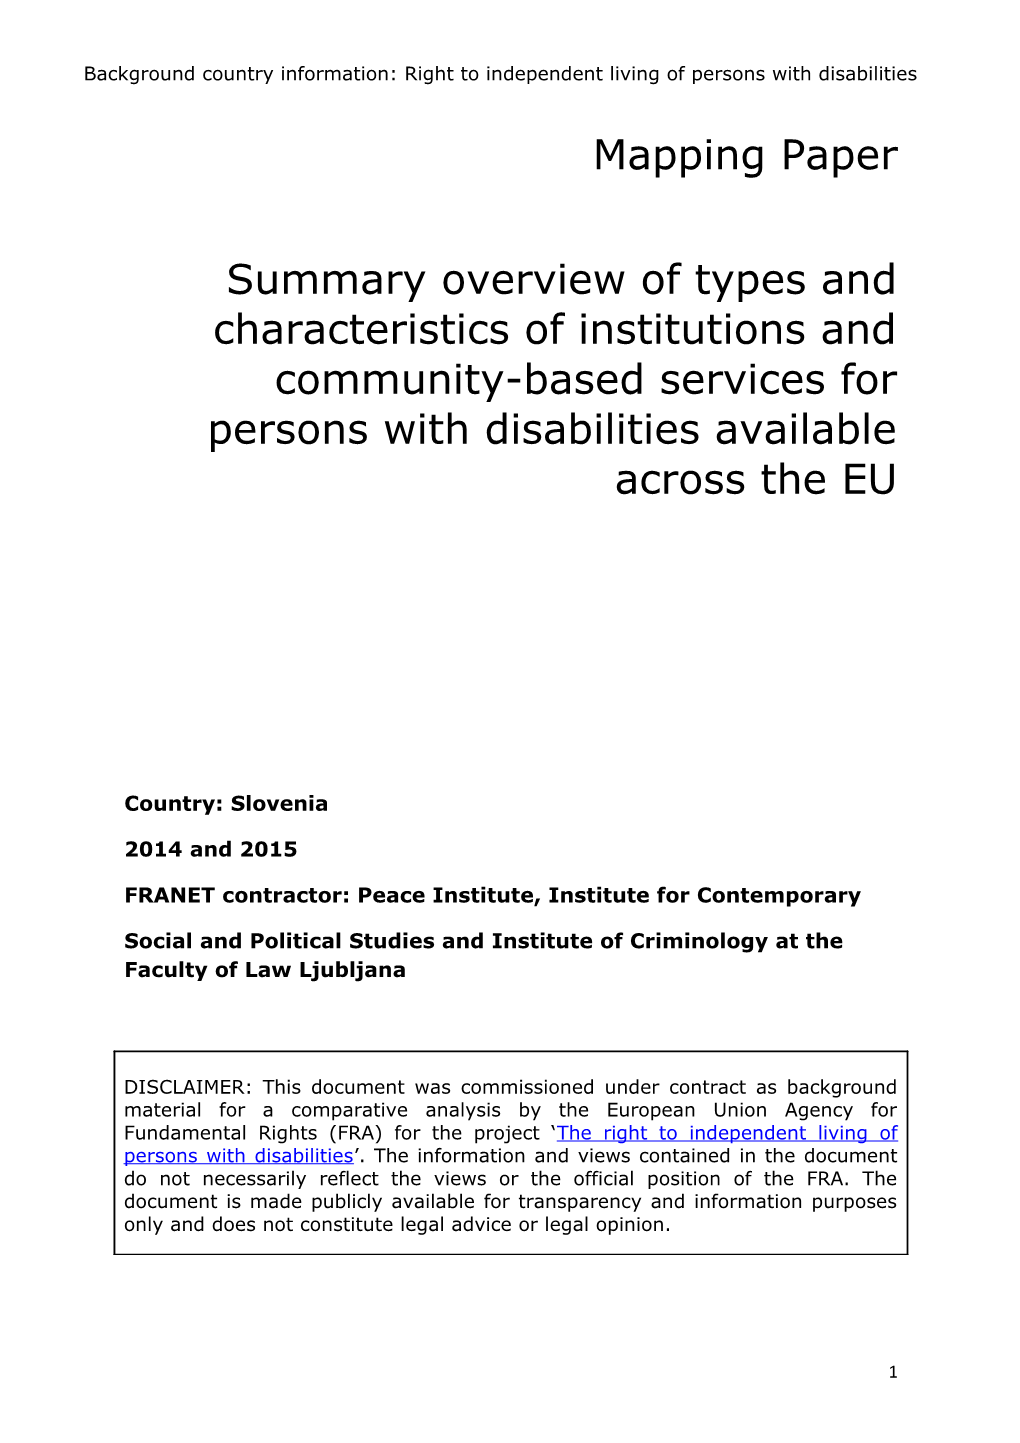 Summary Overview of Types and Characteristics of Institutions and Community-Based Services